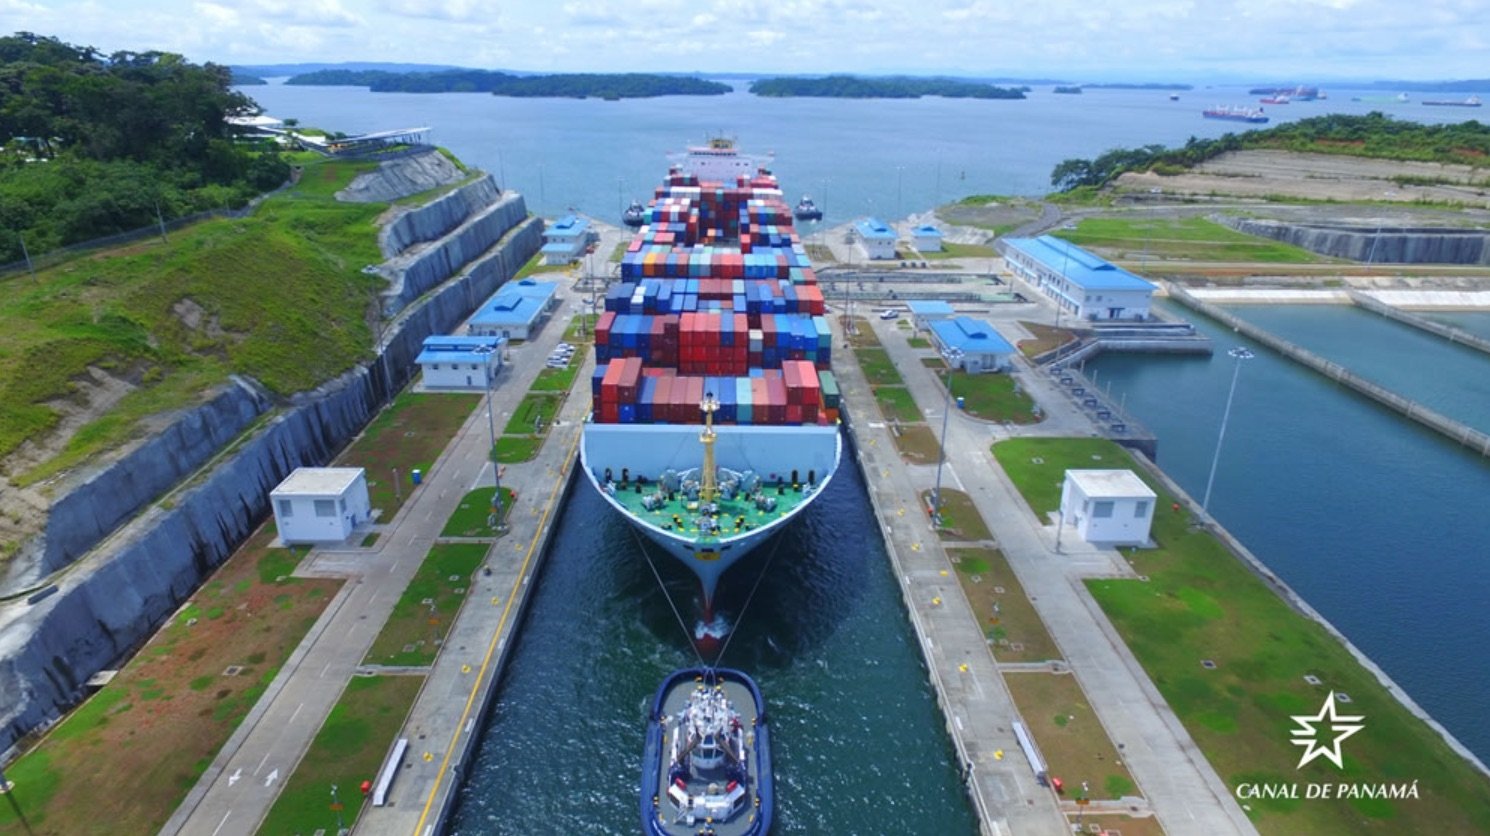 Panama Canal decision to increase containership size limits to boost